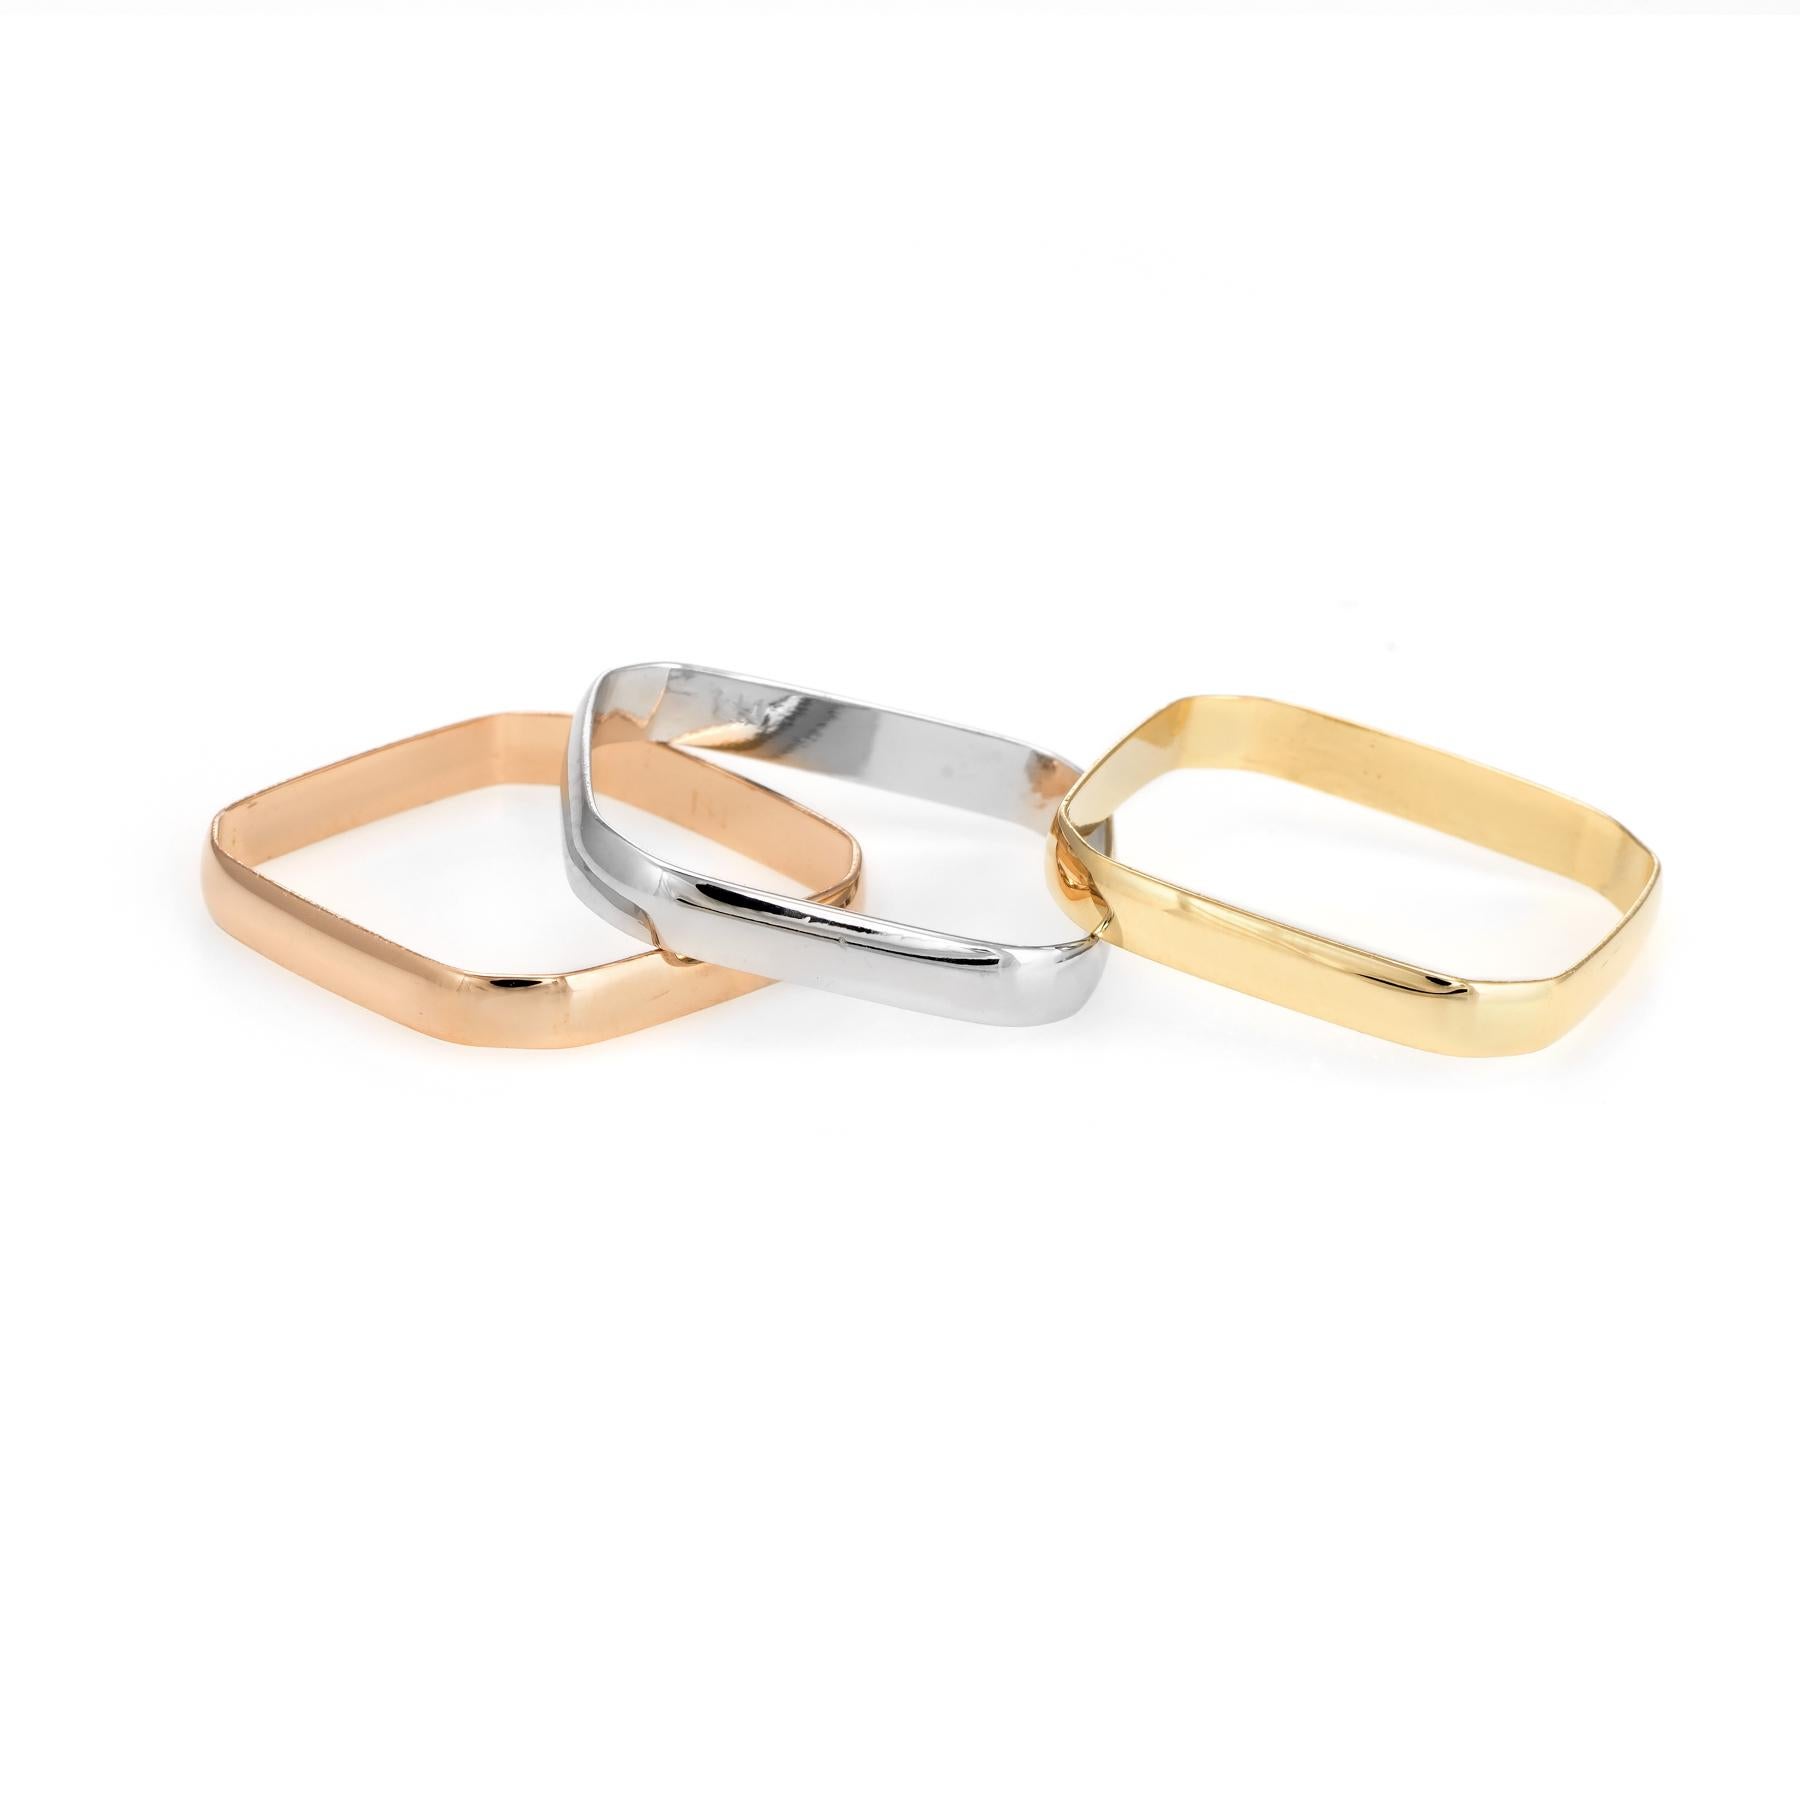 Distinct & stylish set of 3 square stacking rings, crafted in 18 karat yellow, rose and white gold. 

The set of 3 square bands can be worn alone, as a pair or as 3 rings stacked together. The square design is a unique and stylish look. Also great